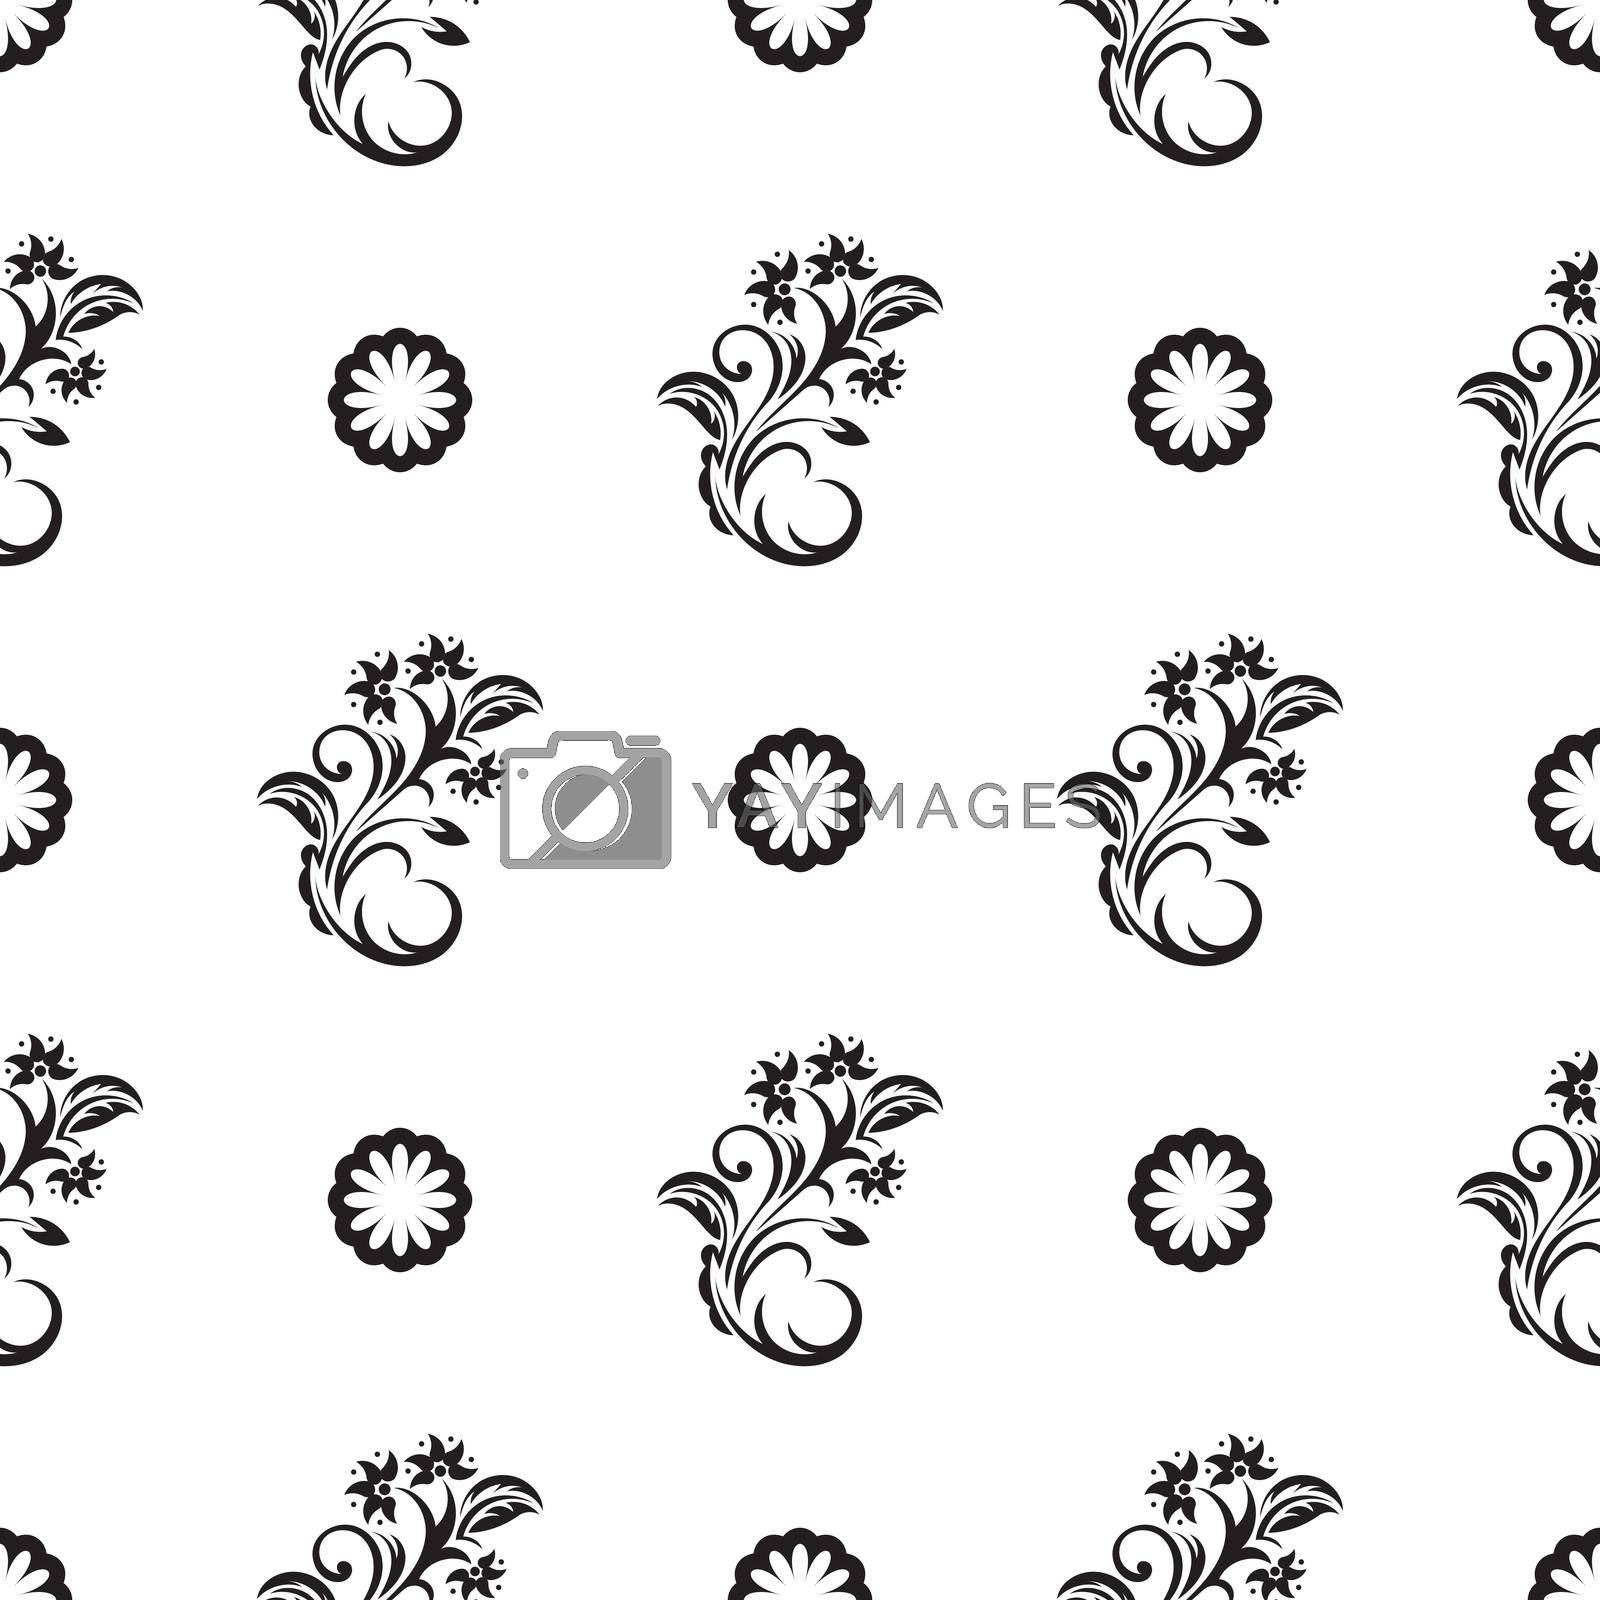 Seamless black and white pattern with flowers and monograms in Simple style. Good for backgrounds and prints. Vector illustration.